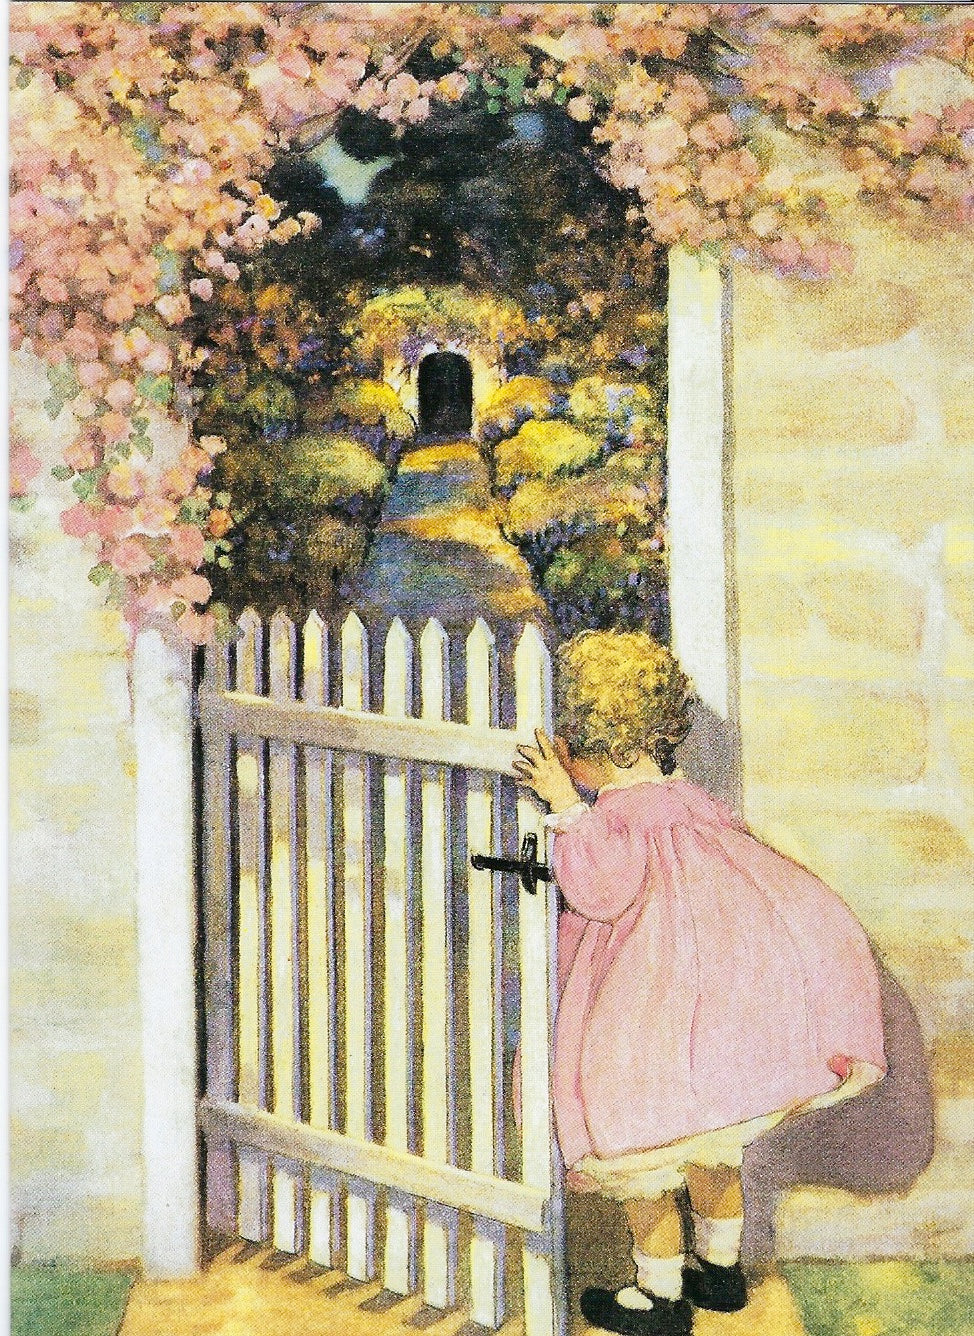 A young child in a pink dress peers curiously through a white picket gate surrounded by lush greenery and flowering vines, with a soft glow emanating from behind the Birthday Greeting Card - You are as young as your dreams by Greeting Cards.